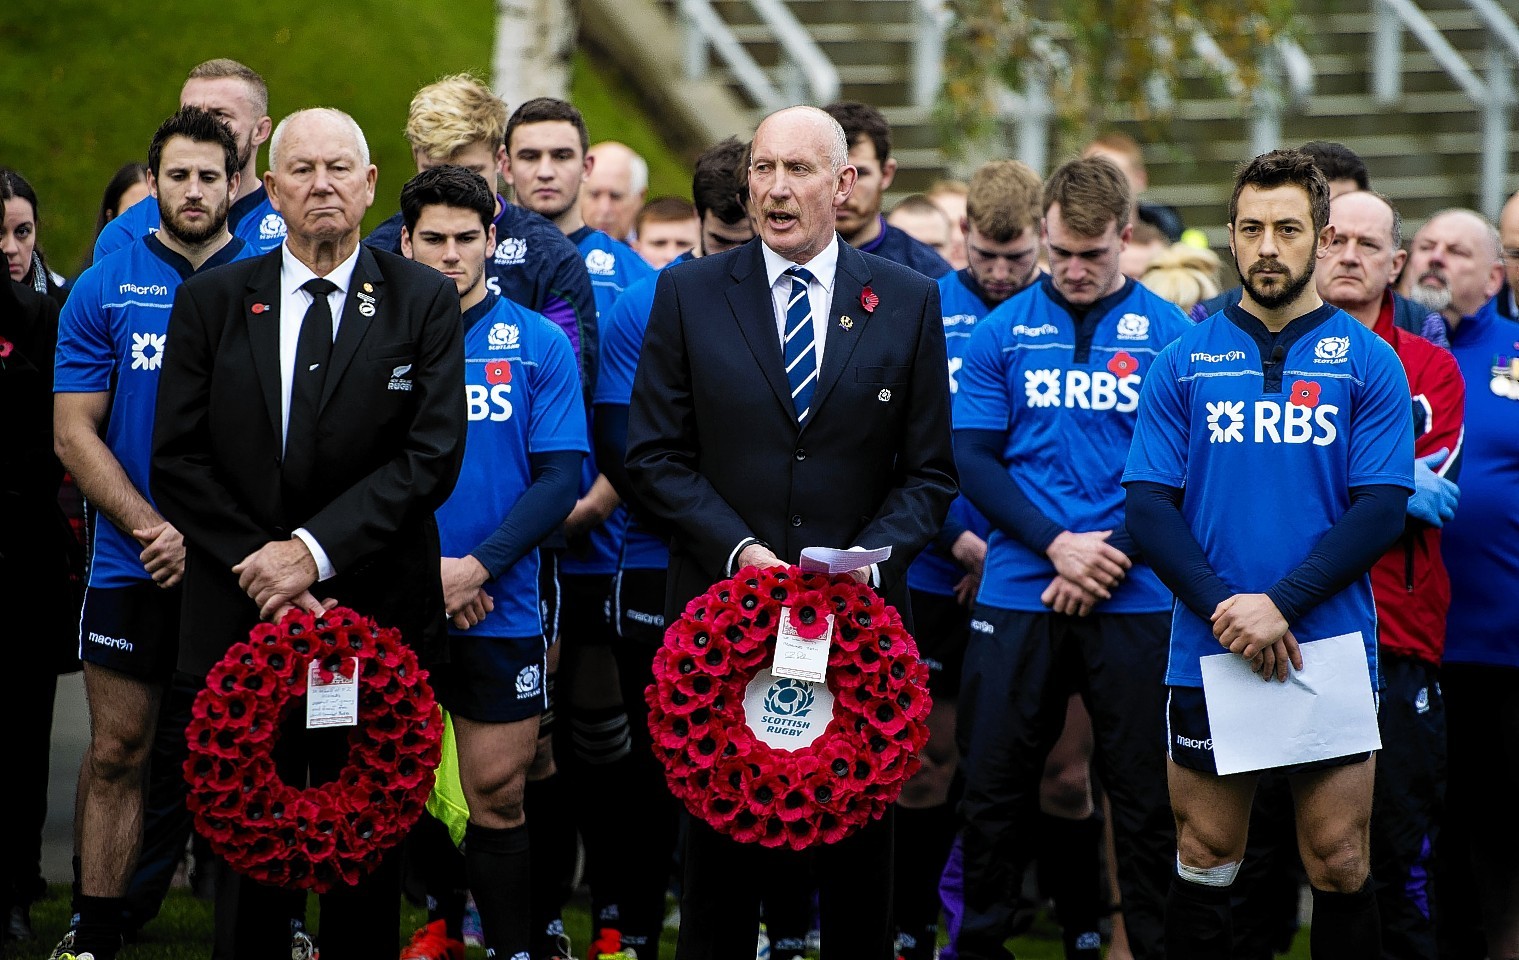 New Zealand Rugby President Ian MacRae, SRU President Iain Rankin and Scotland Captain Greig Laidlaw pay their respects to the fallen British soldiers next to War Memorial at Murrayfield.